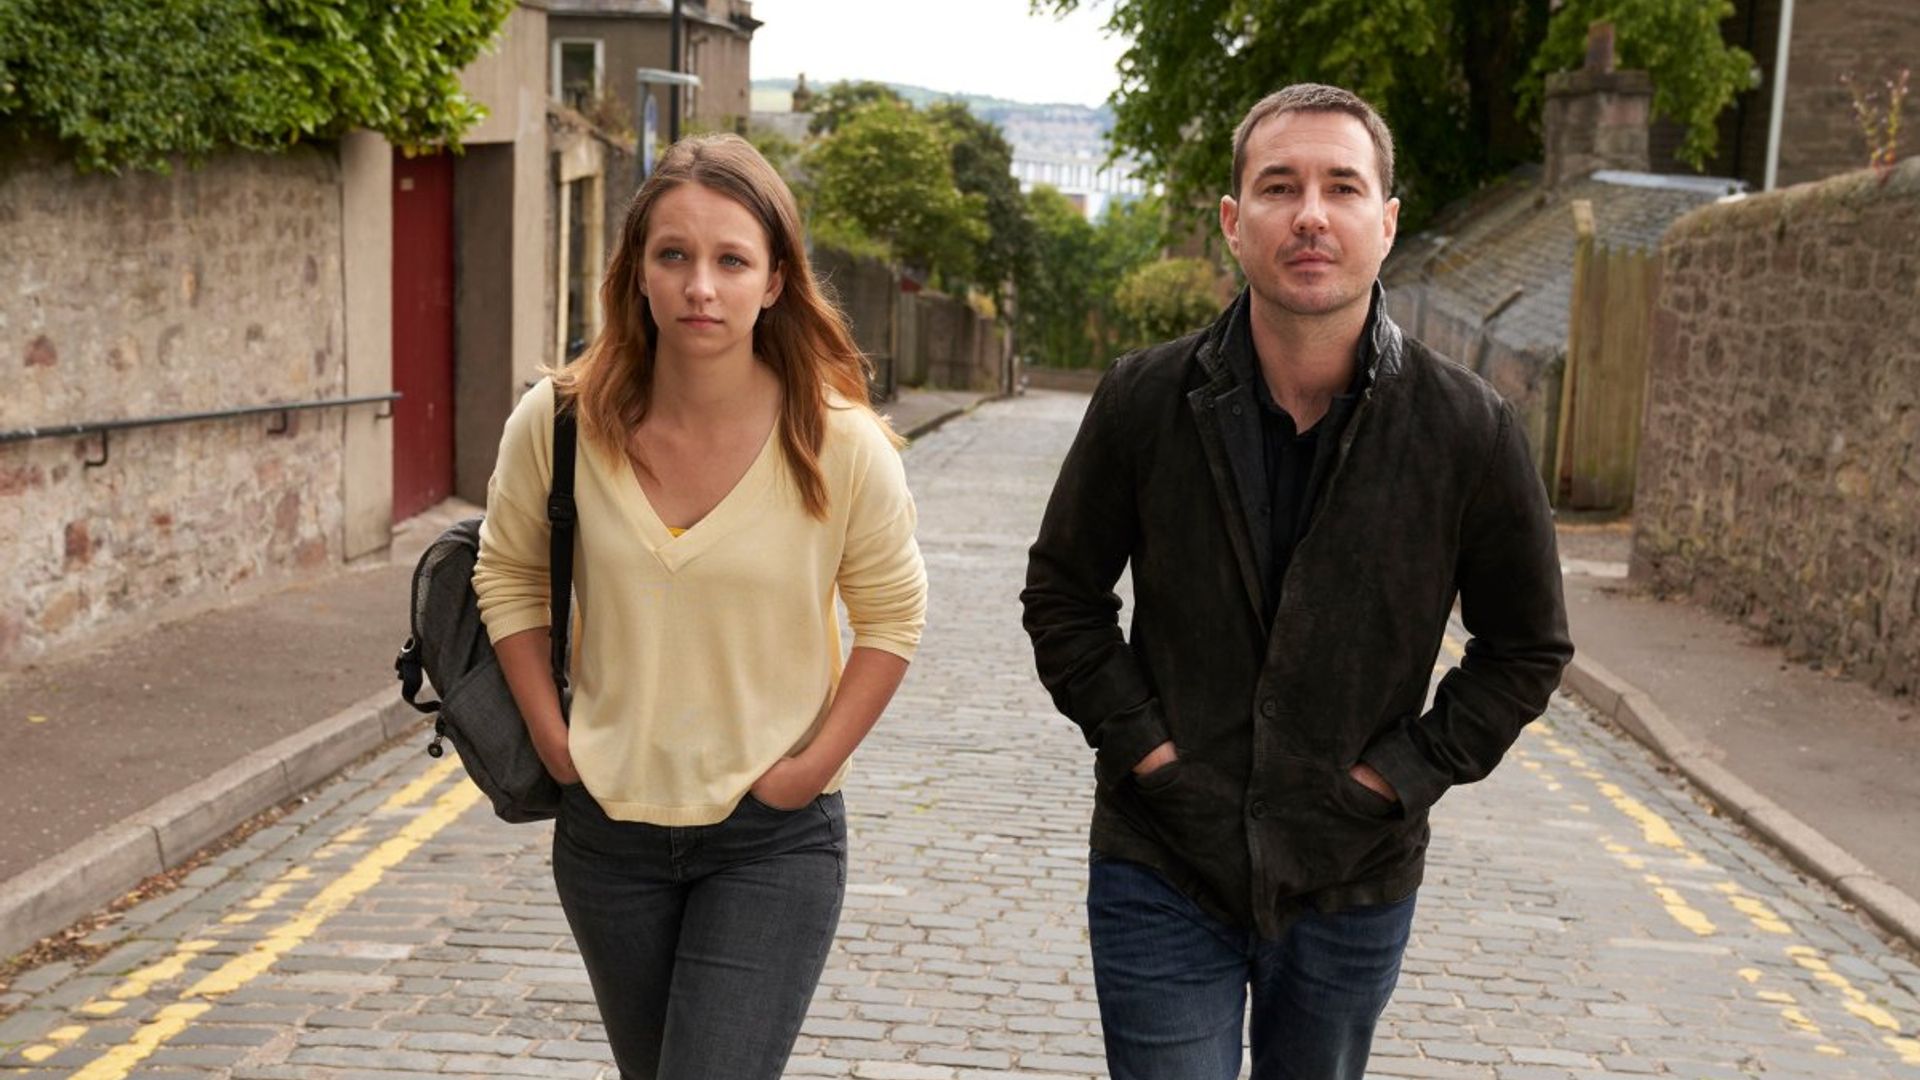 Meet the cast of BBC's Traces